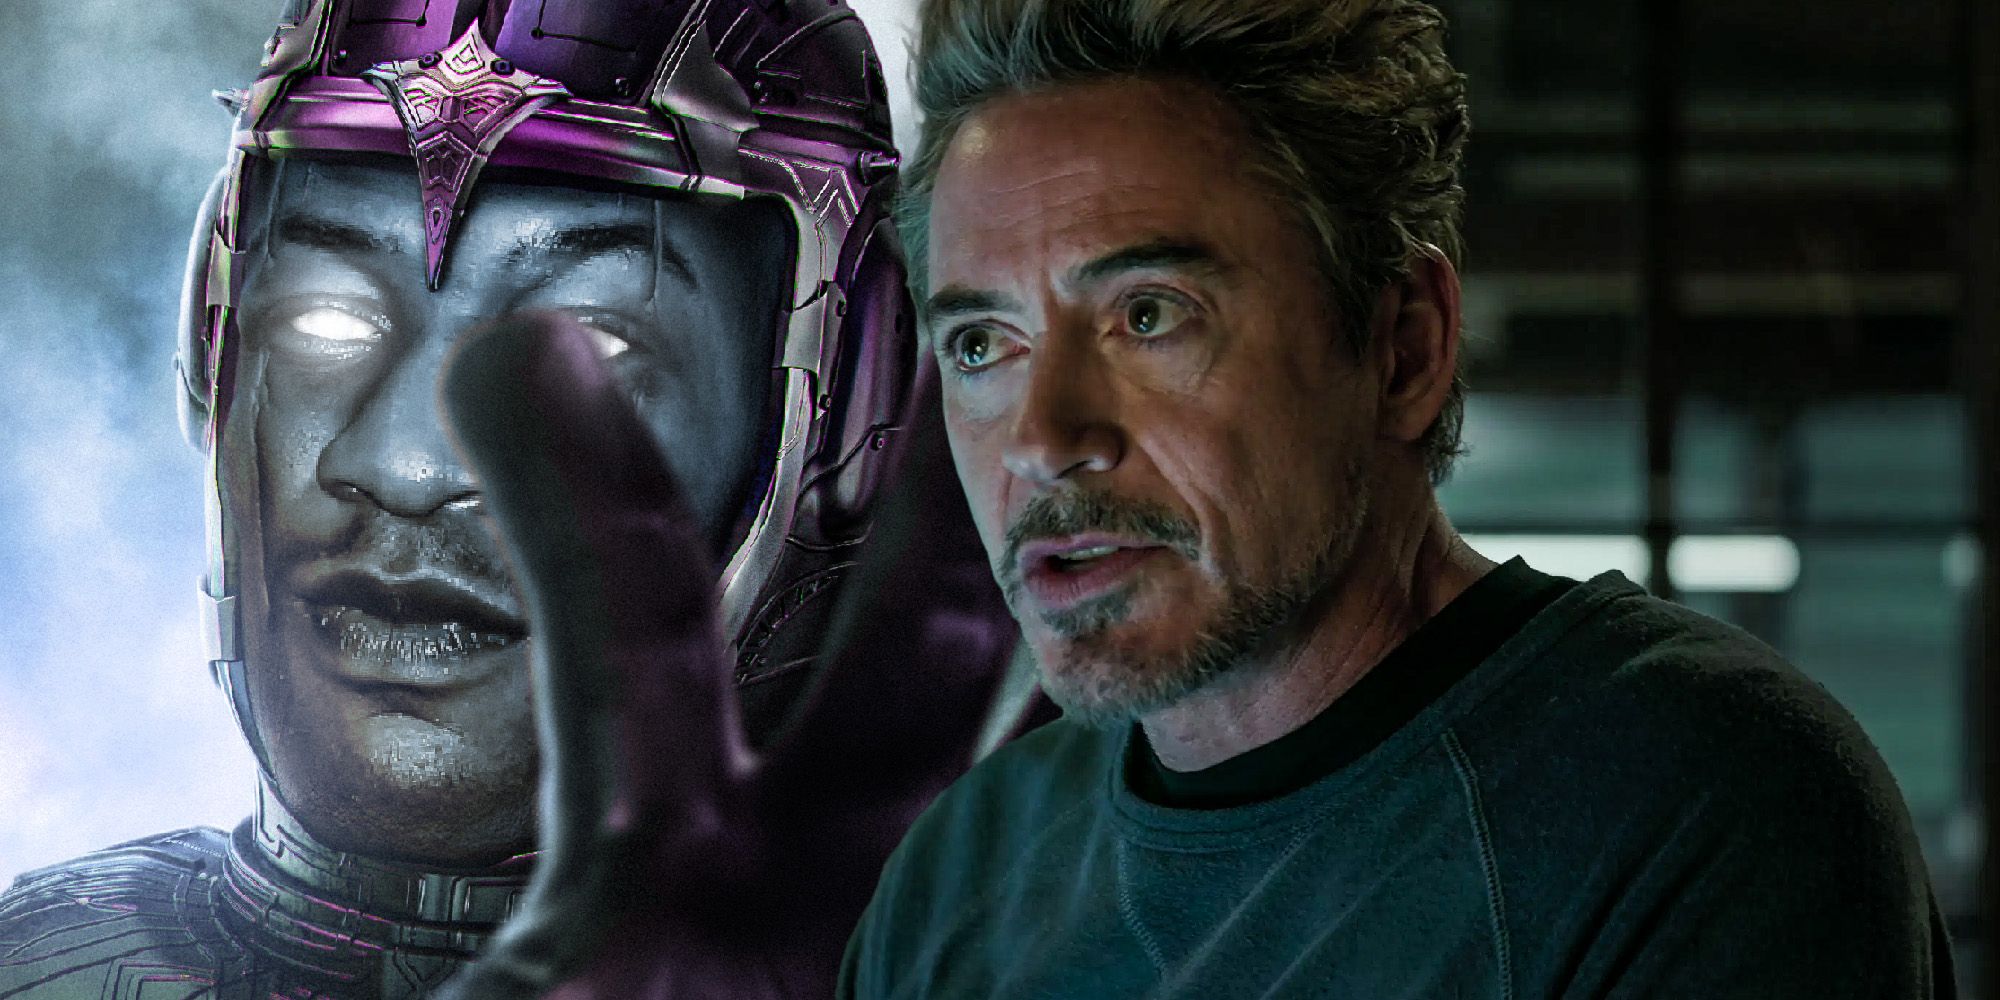 Kang will face off against Robert Downey Jr.'s Iron Man in the MCU